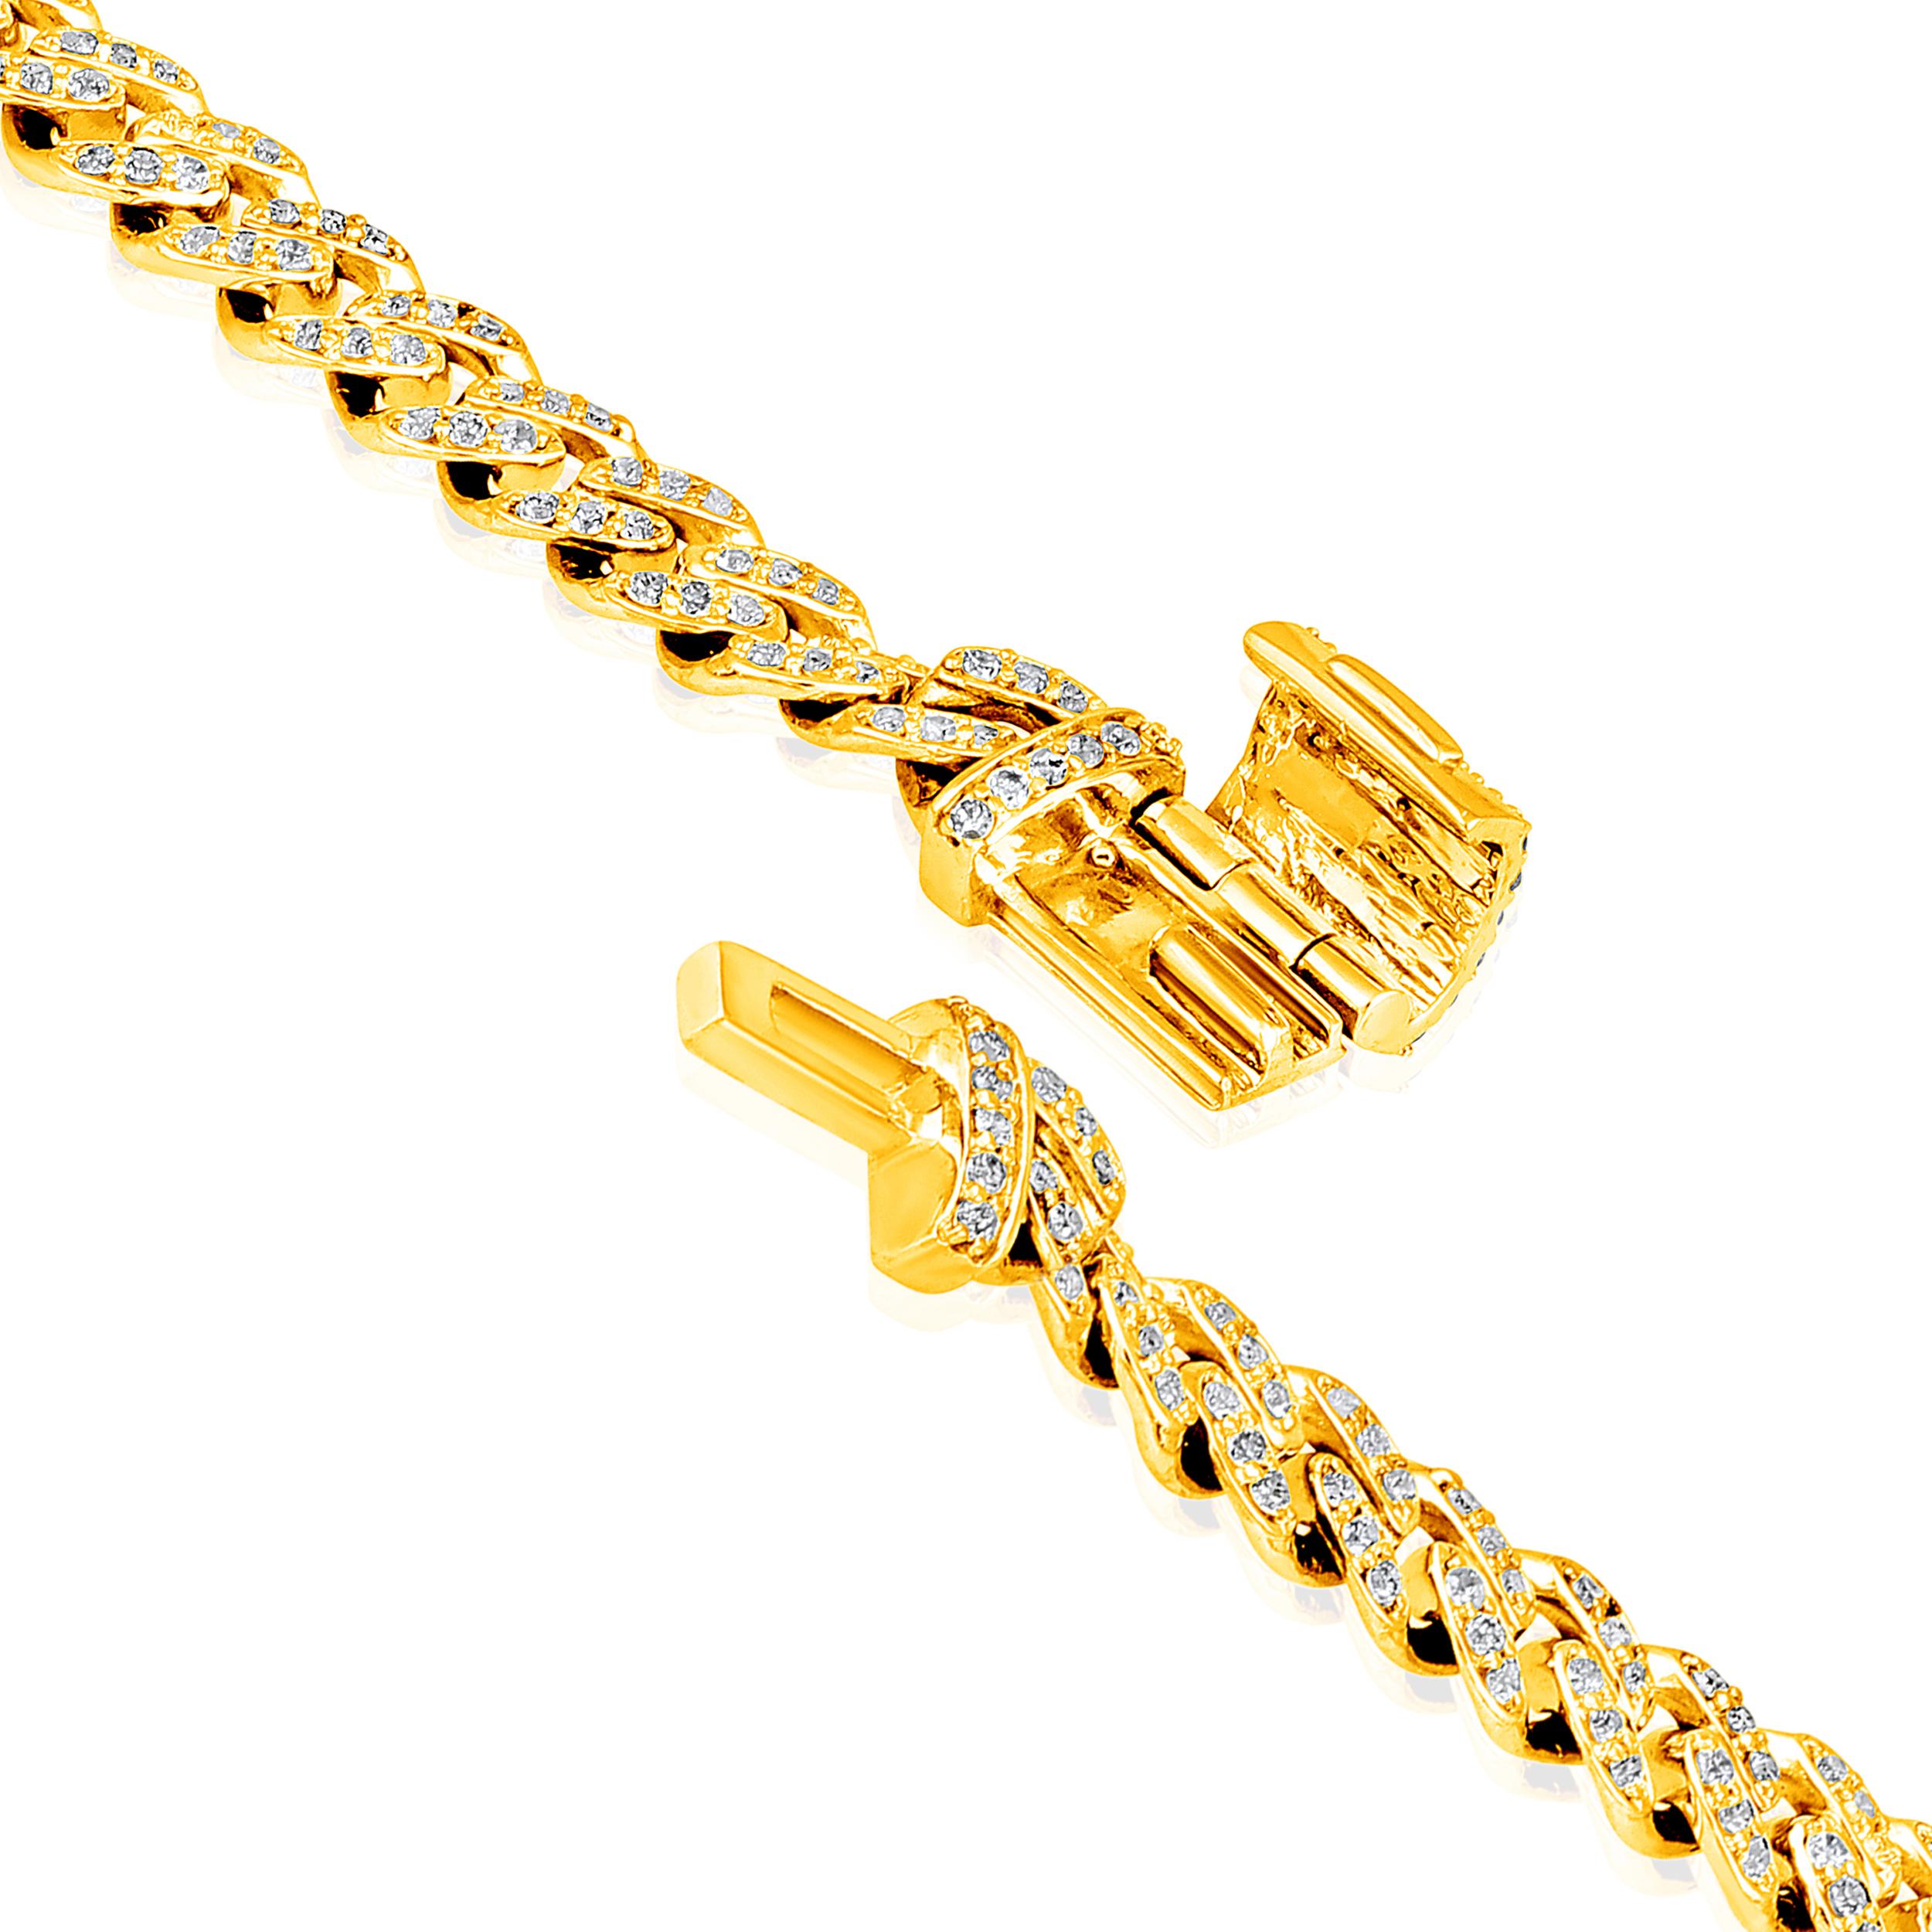 Crafted in 5.94 grams of 10K Yellow Gold, the bracelet contains 432 stones of Round Diamonds with a total of 0.82 carat in F-G color and I1-I2 carat. The bracelet length is 7 inches.
This jewelry piece will be expertly crafted by our skilled